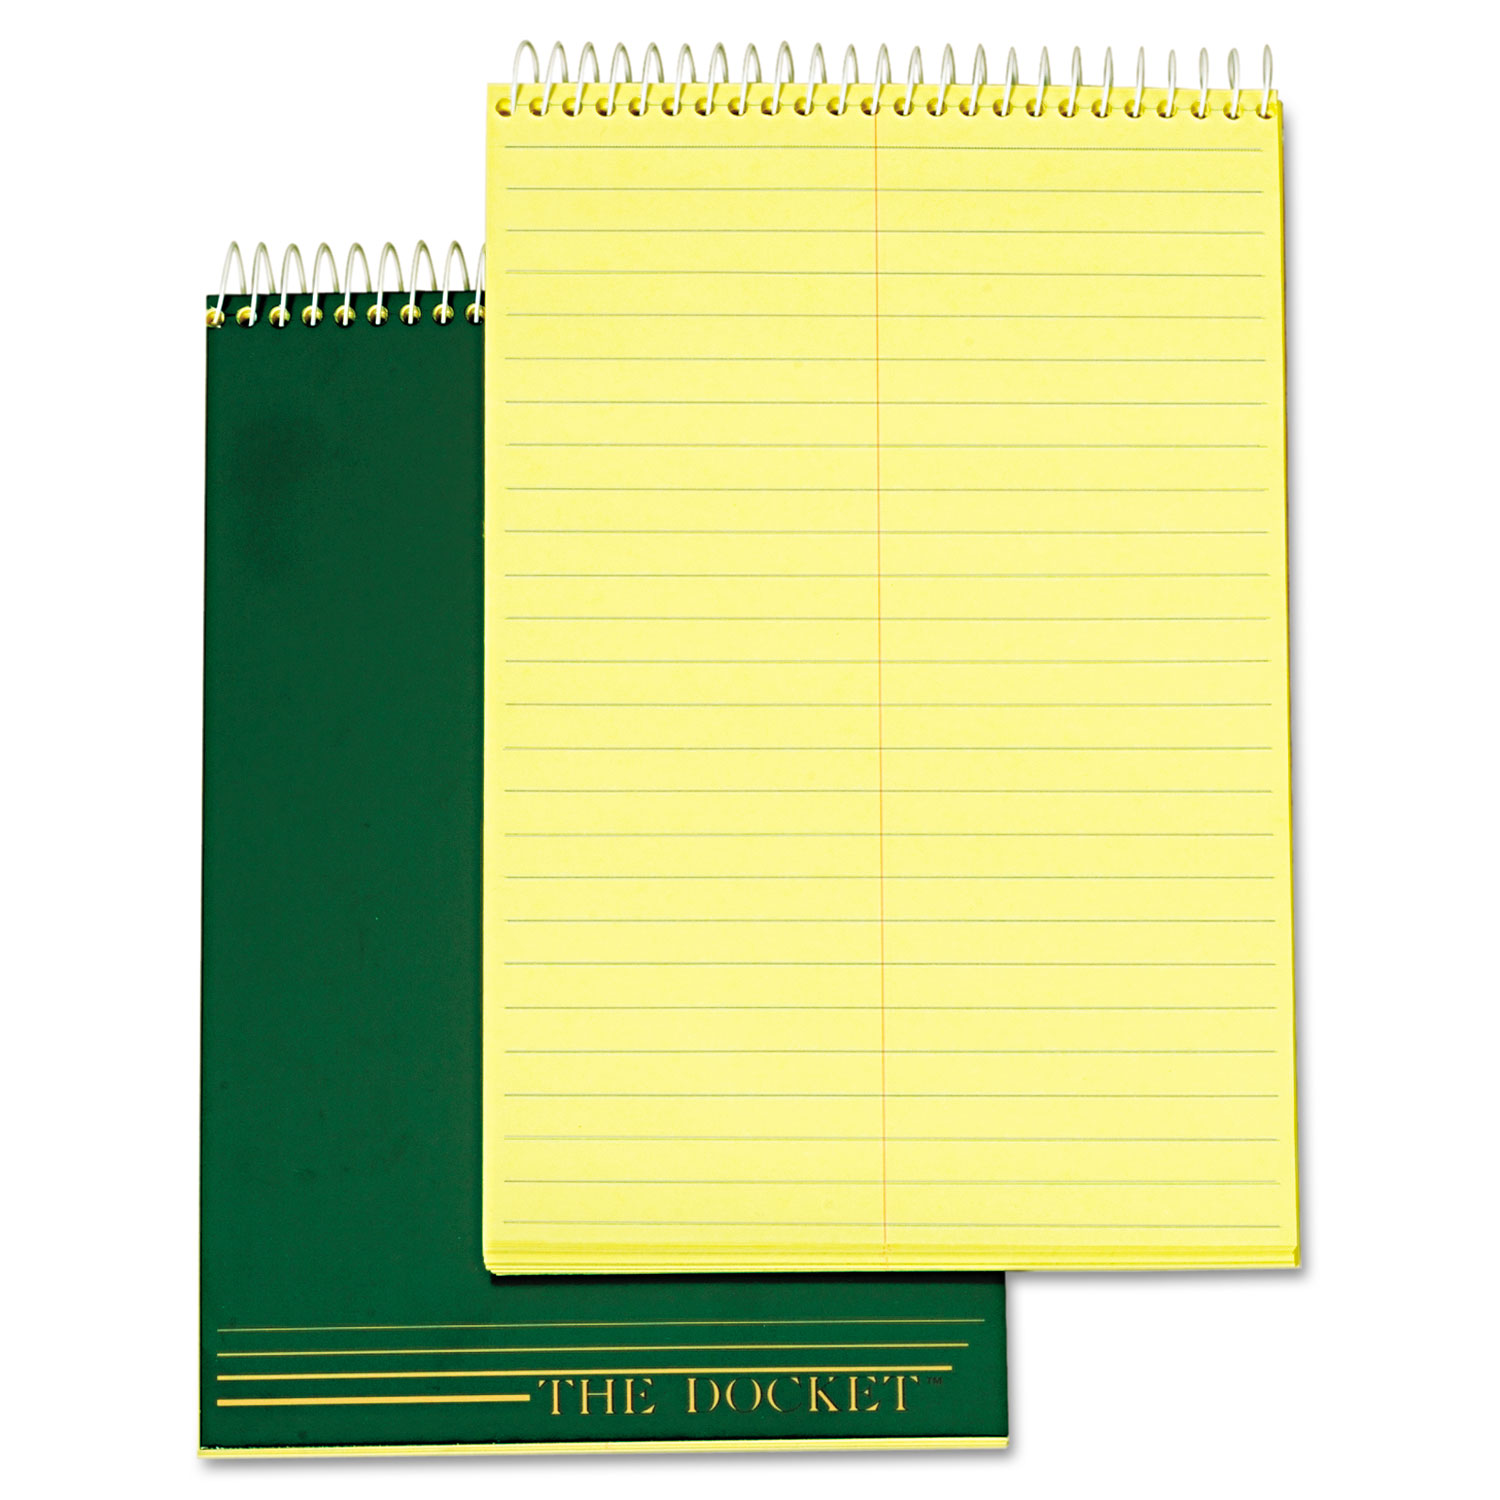  TOPS 63851 Docket Steno Book, Gregg Rule, 6 x 9, Canary, 100 Sheets (TOP63851) 